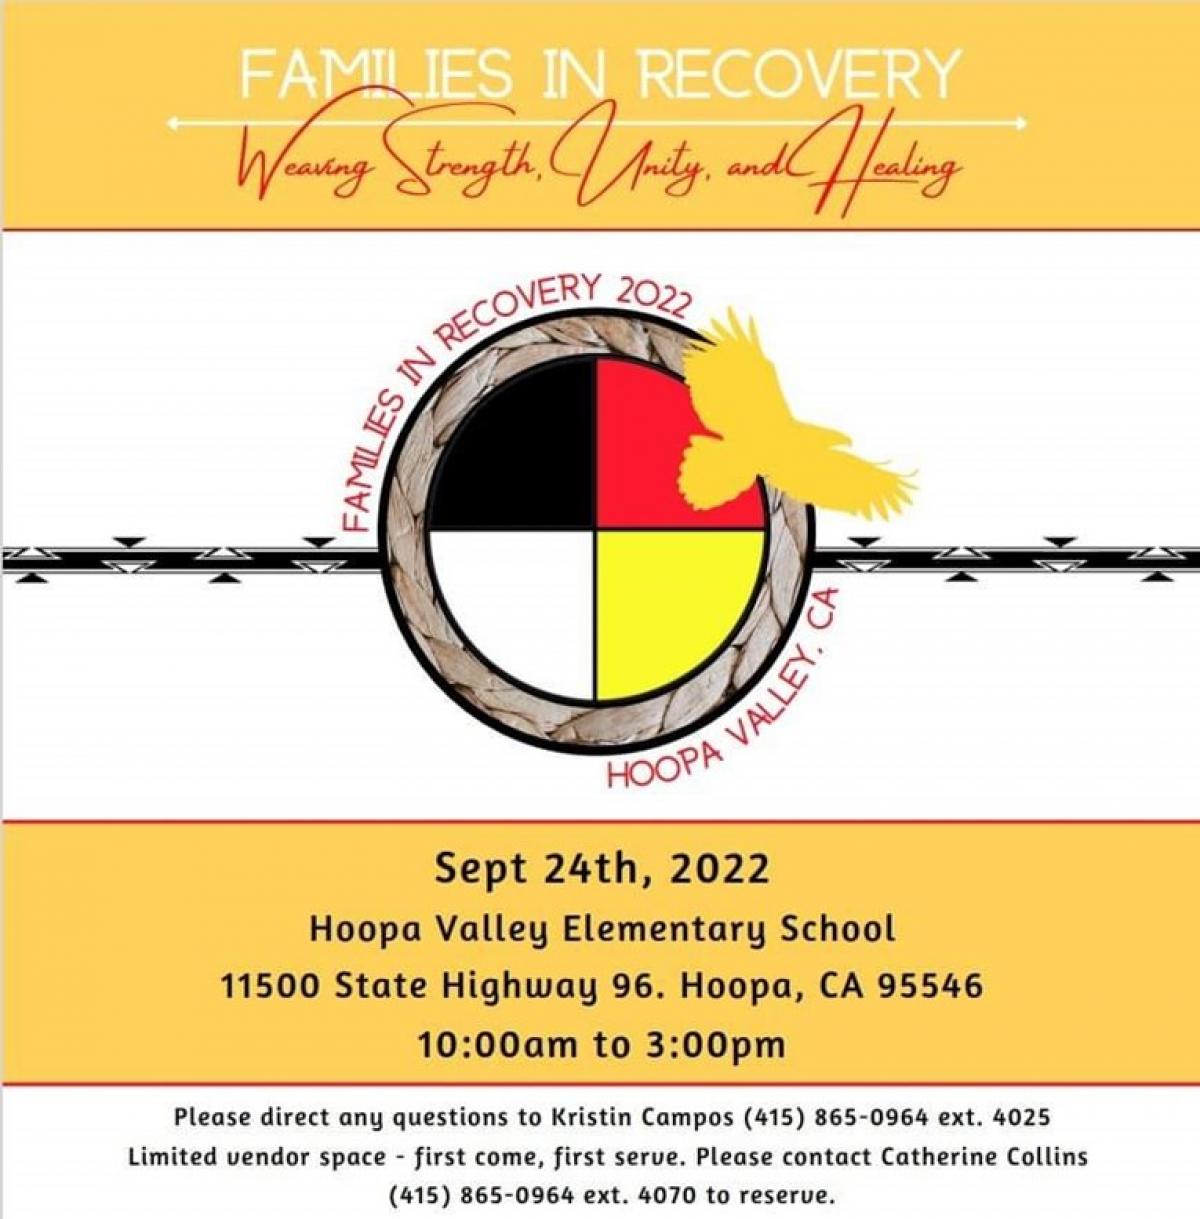 Families In Recovery Event